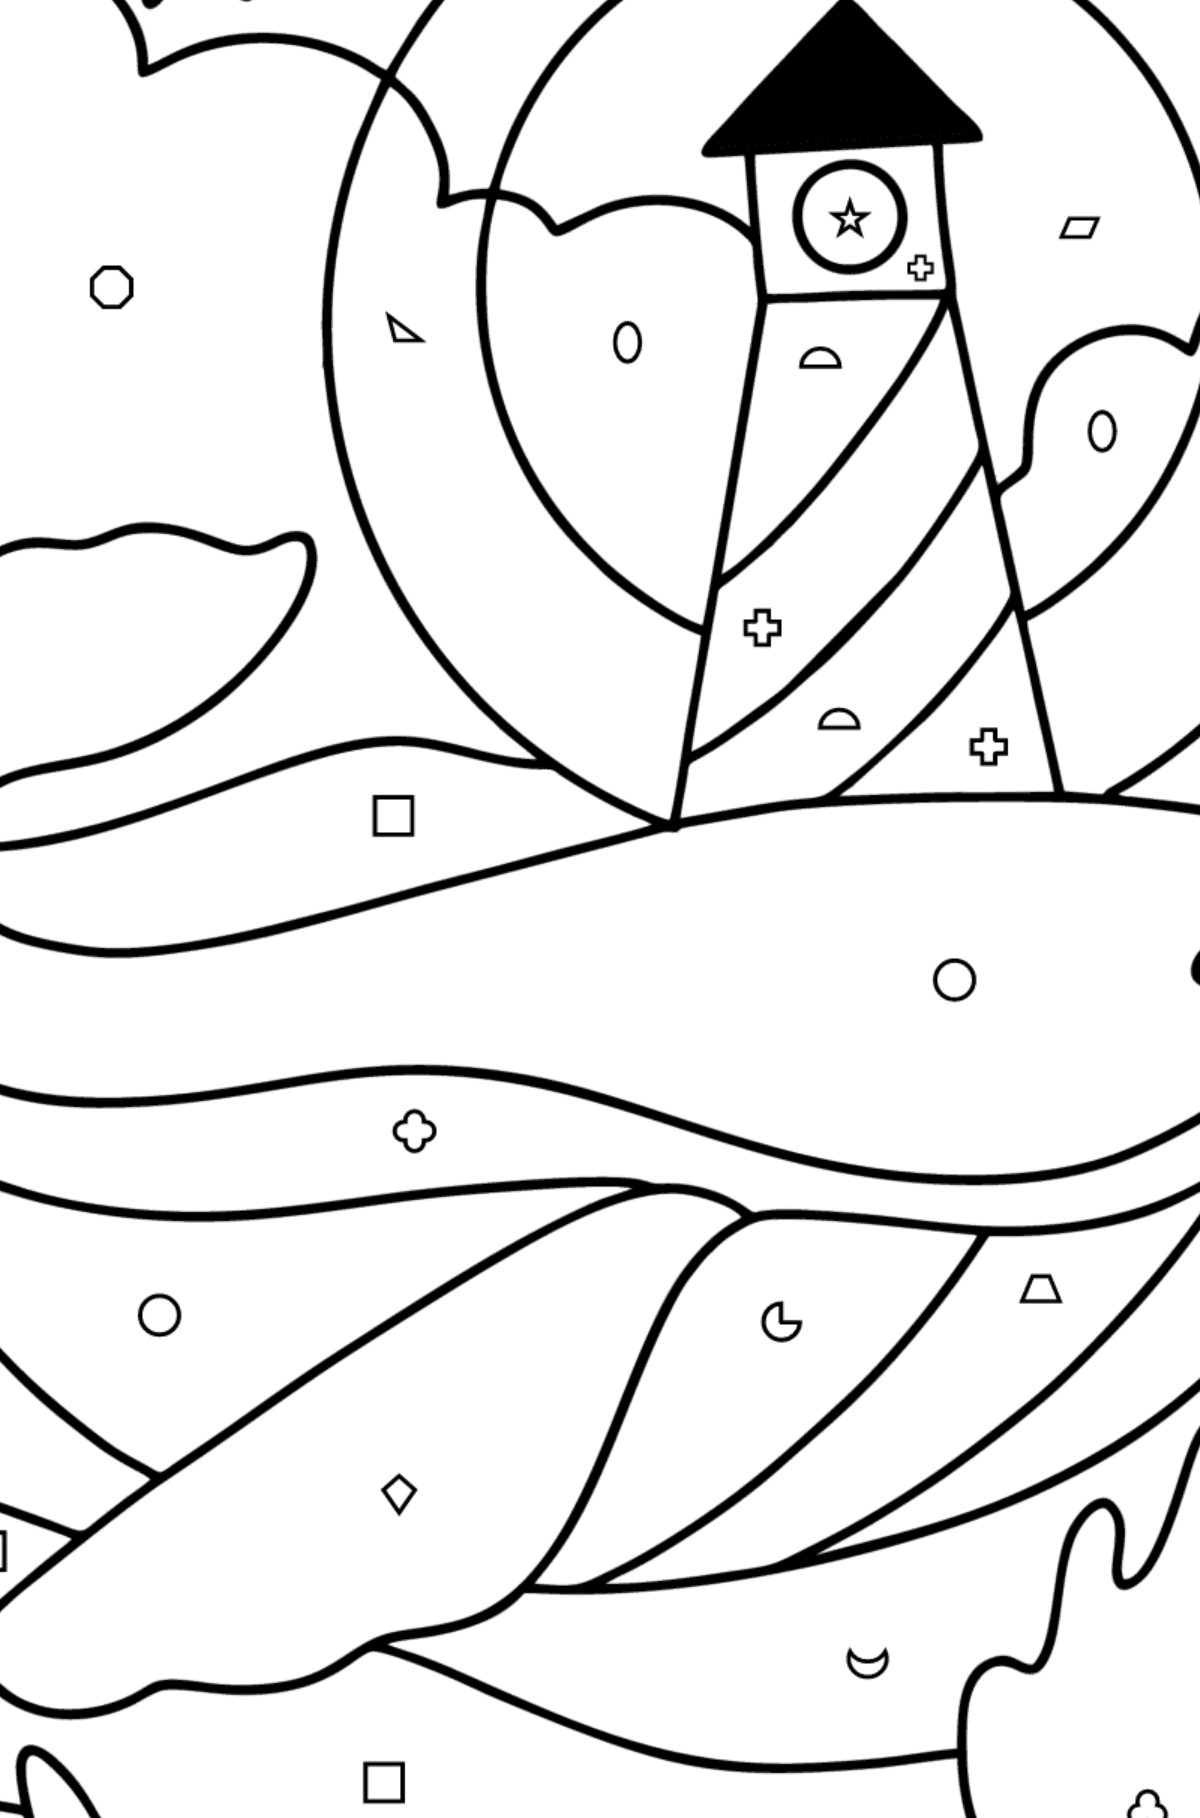 Whale with lighthouse coloring page - Coloring by Geometric Shapes for Kids